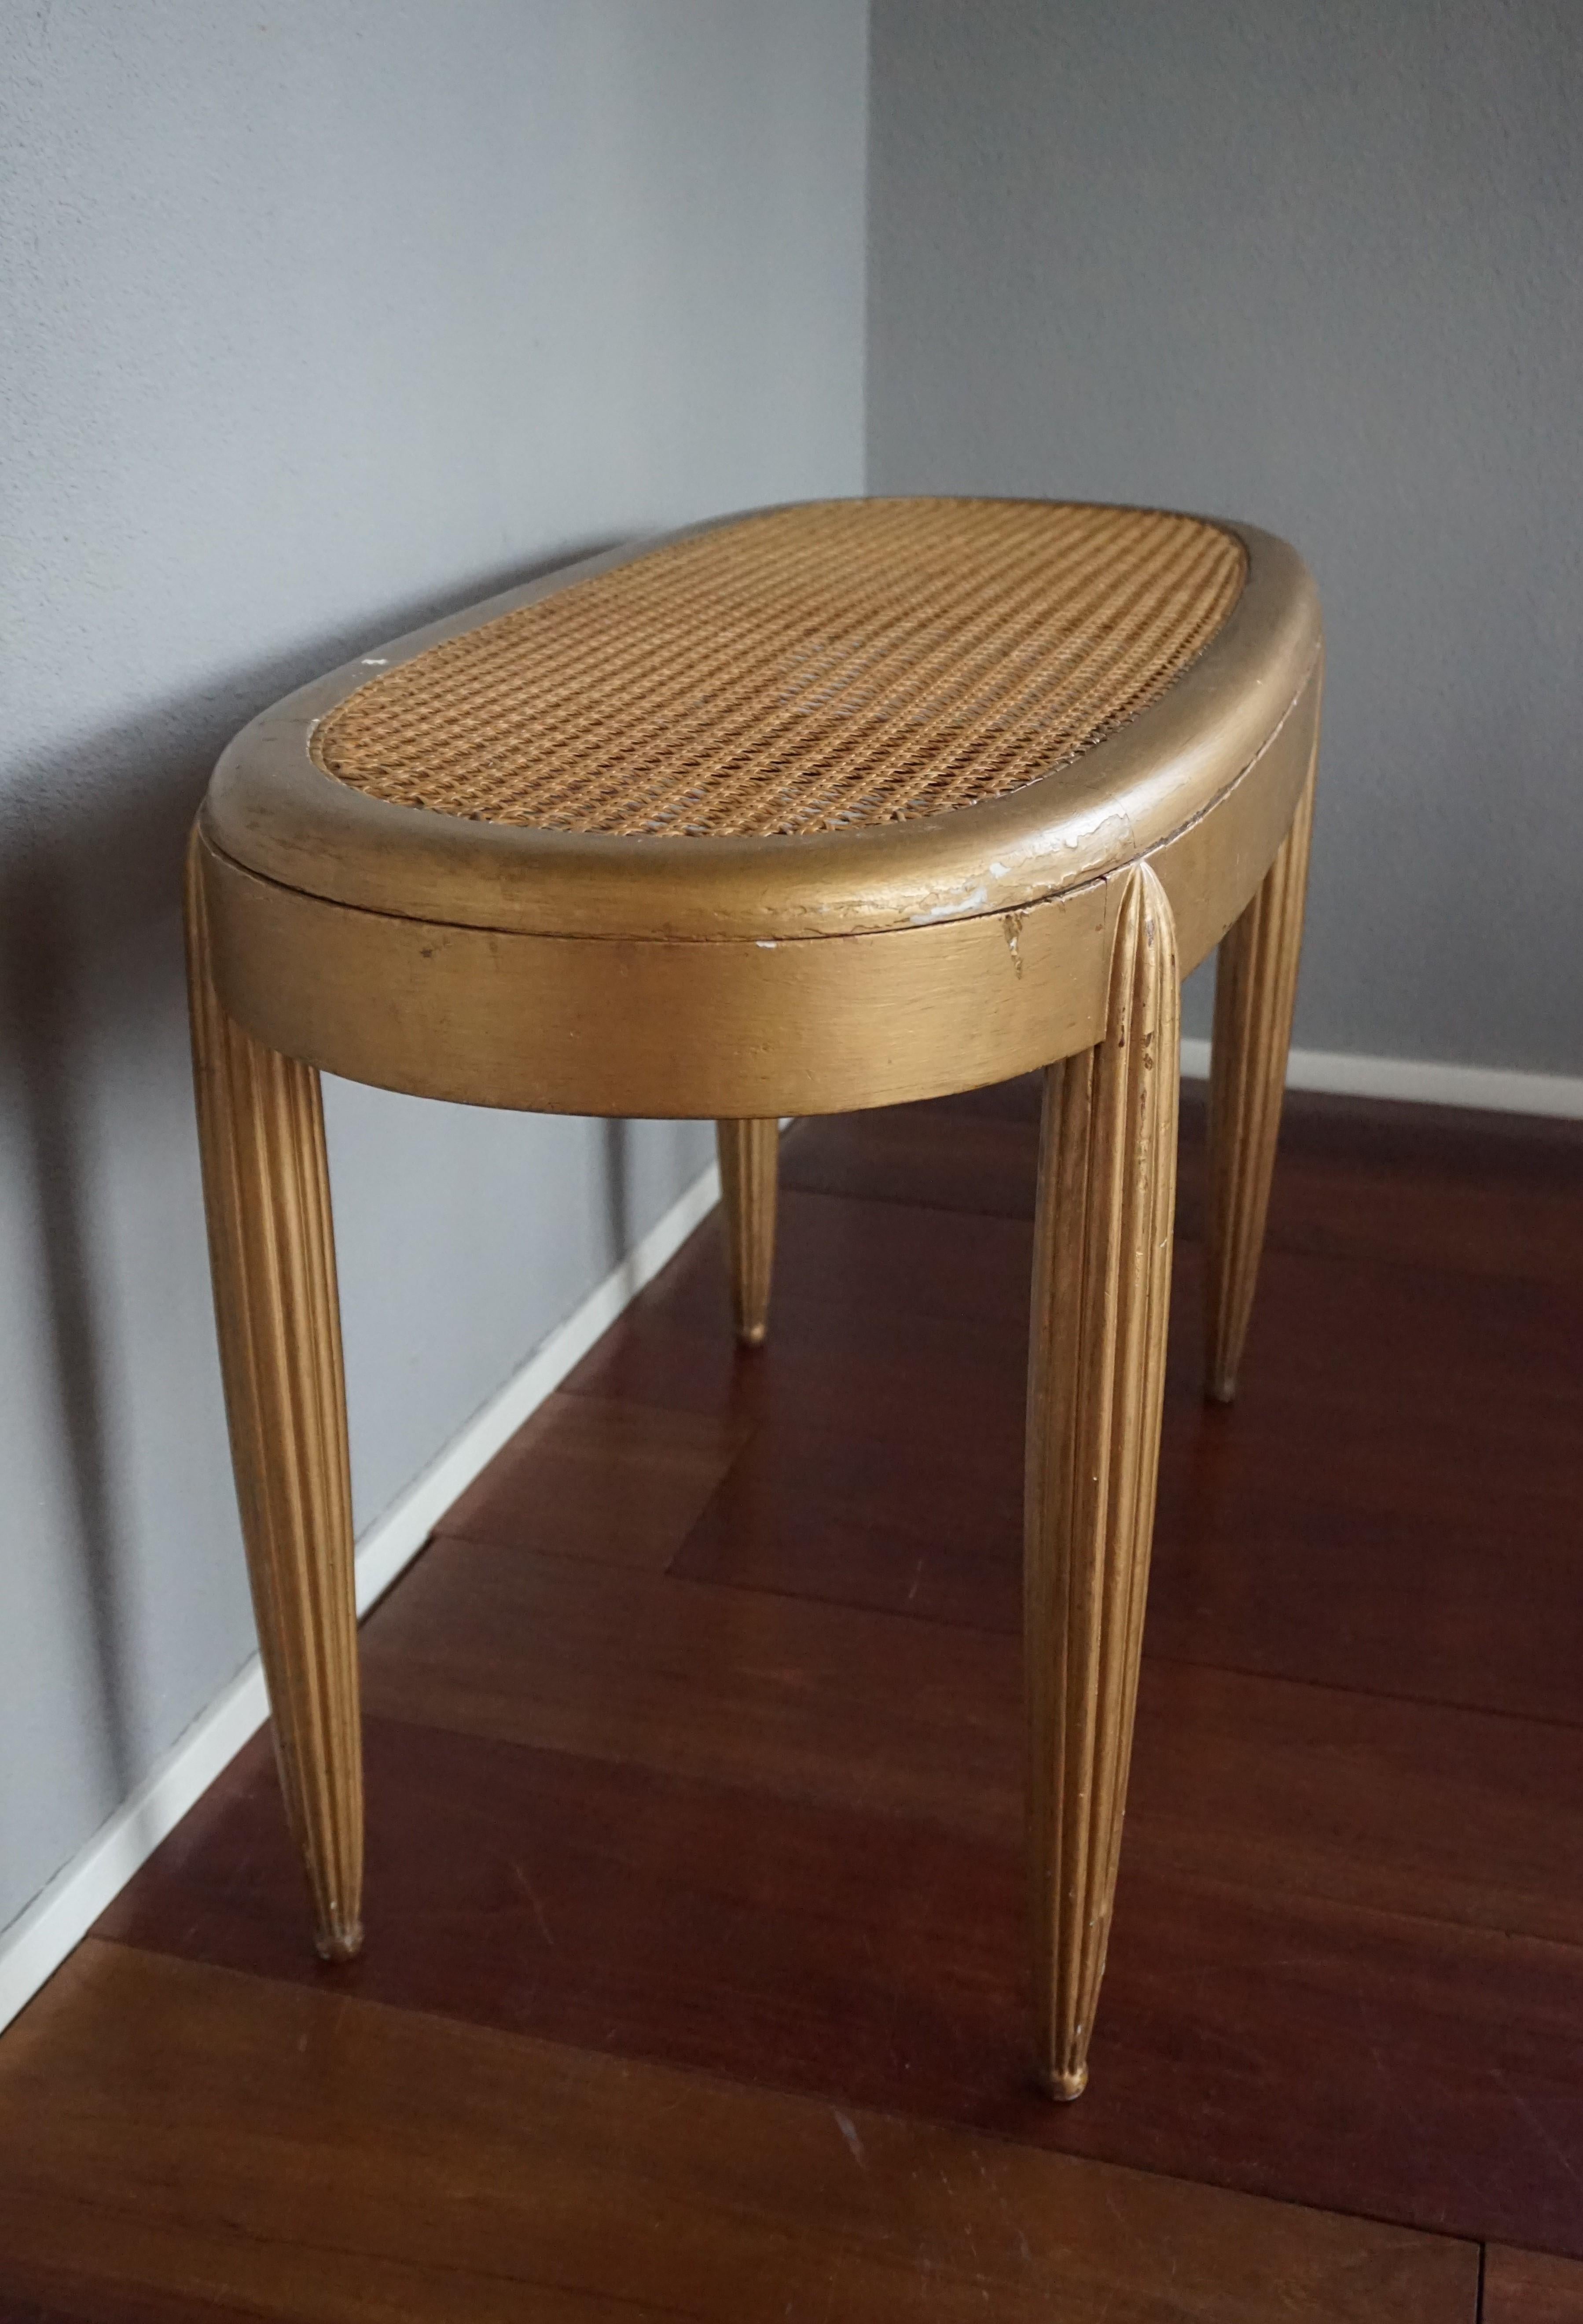 Gold Painted French Art Deco Hall Bench / Stool with Hand-Woven Rattan Webbing For Sale 2